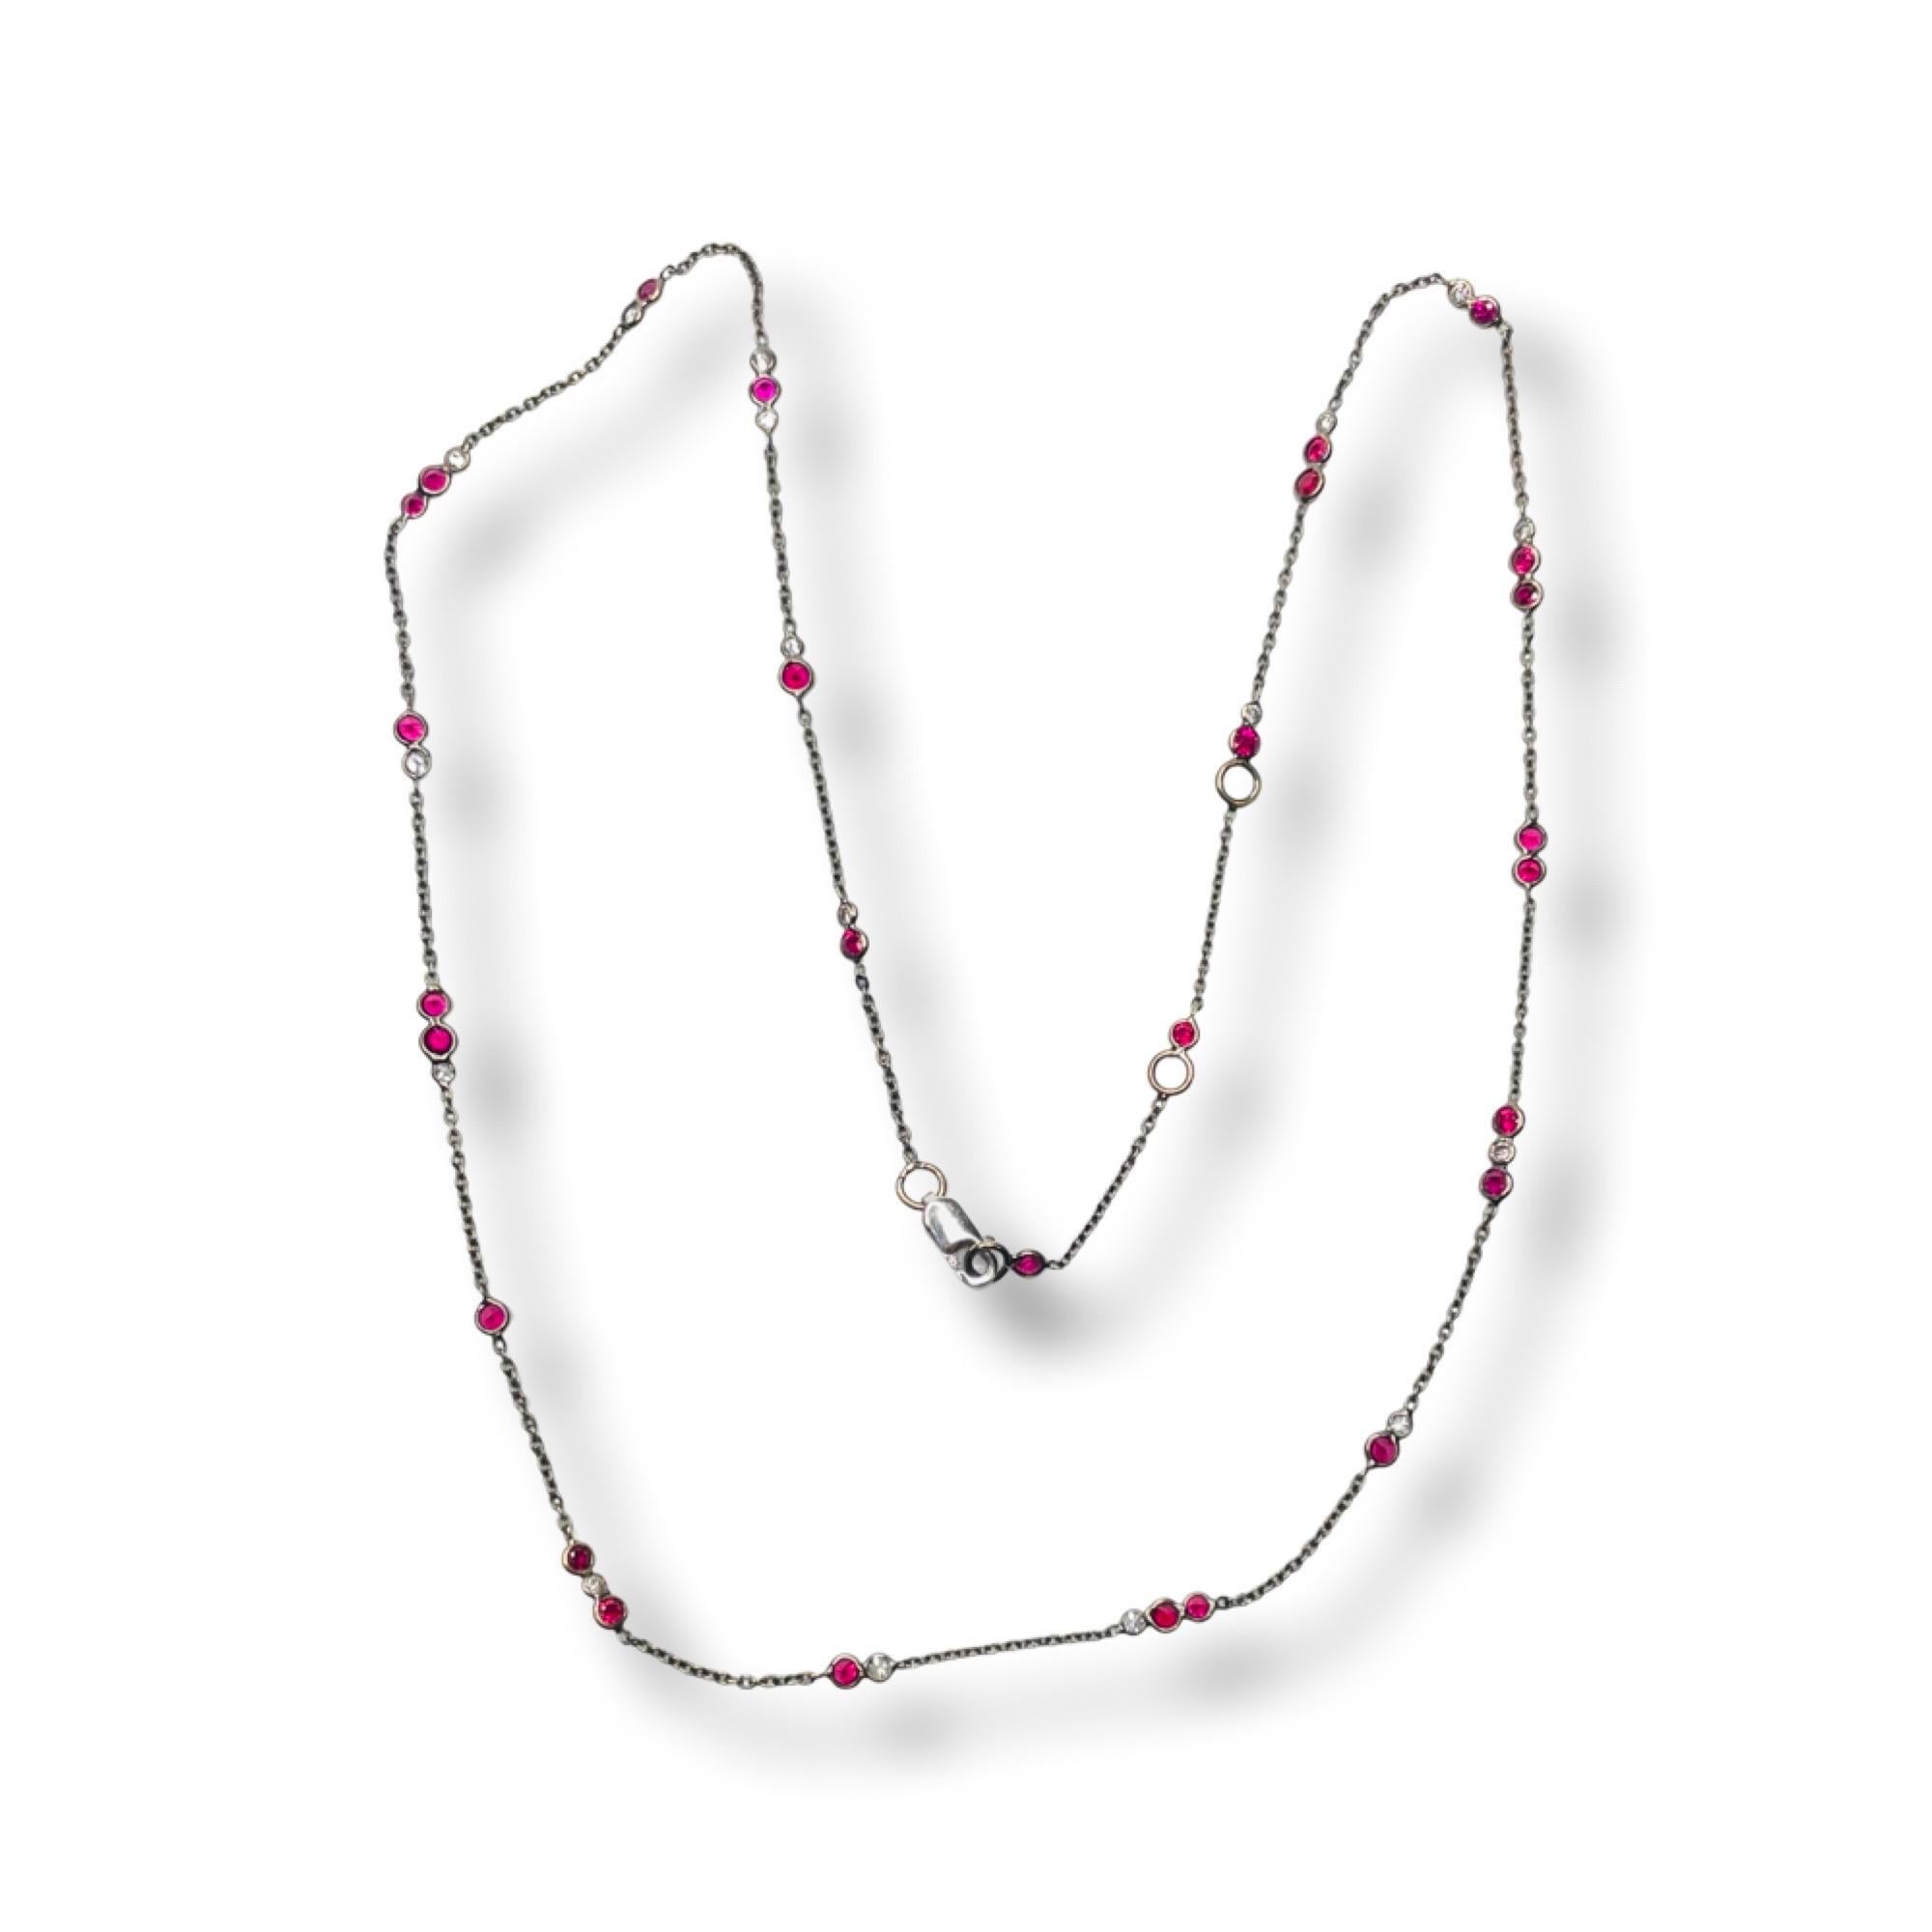 Lithos18K White Gold Black Rhodium Plated Necklace with Rubies & Diamonds. There are 28 Rubies for a total weight of 1.66 Carats. The rubies are a medium dark, vivid red in color. There are 17, full cut round brilliant diamonds, for a total weight